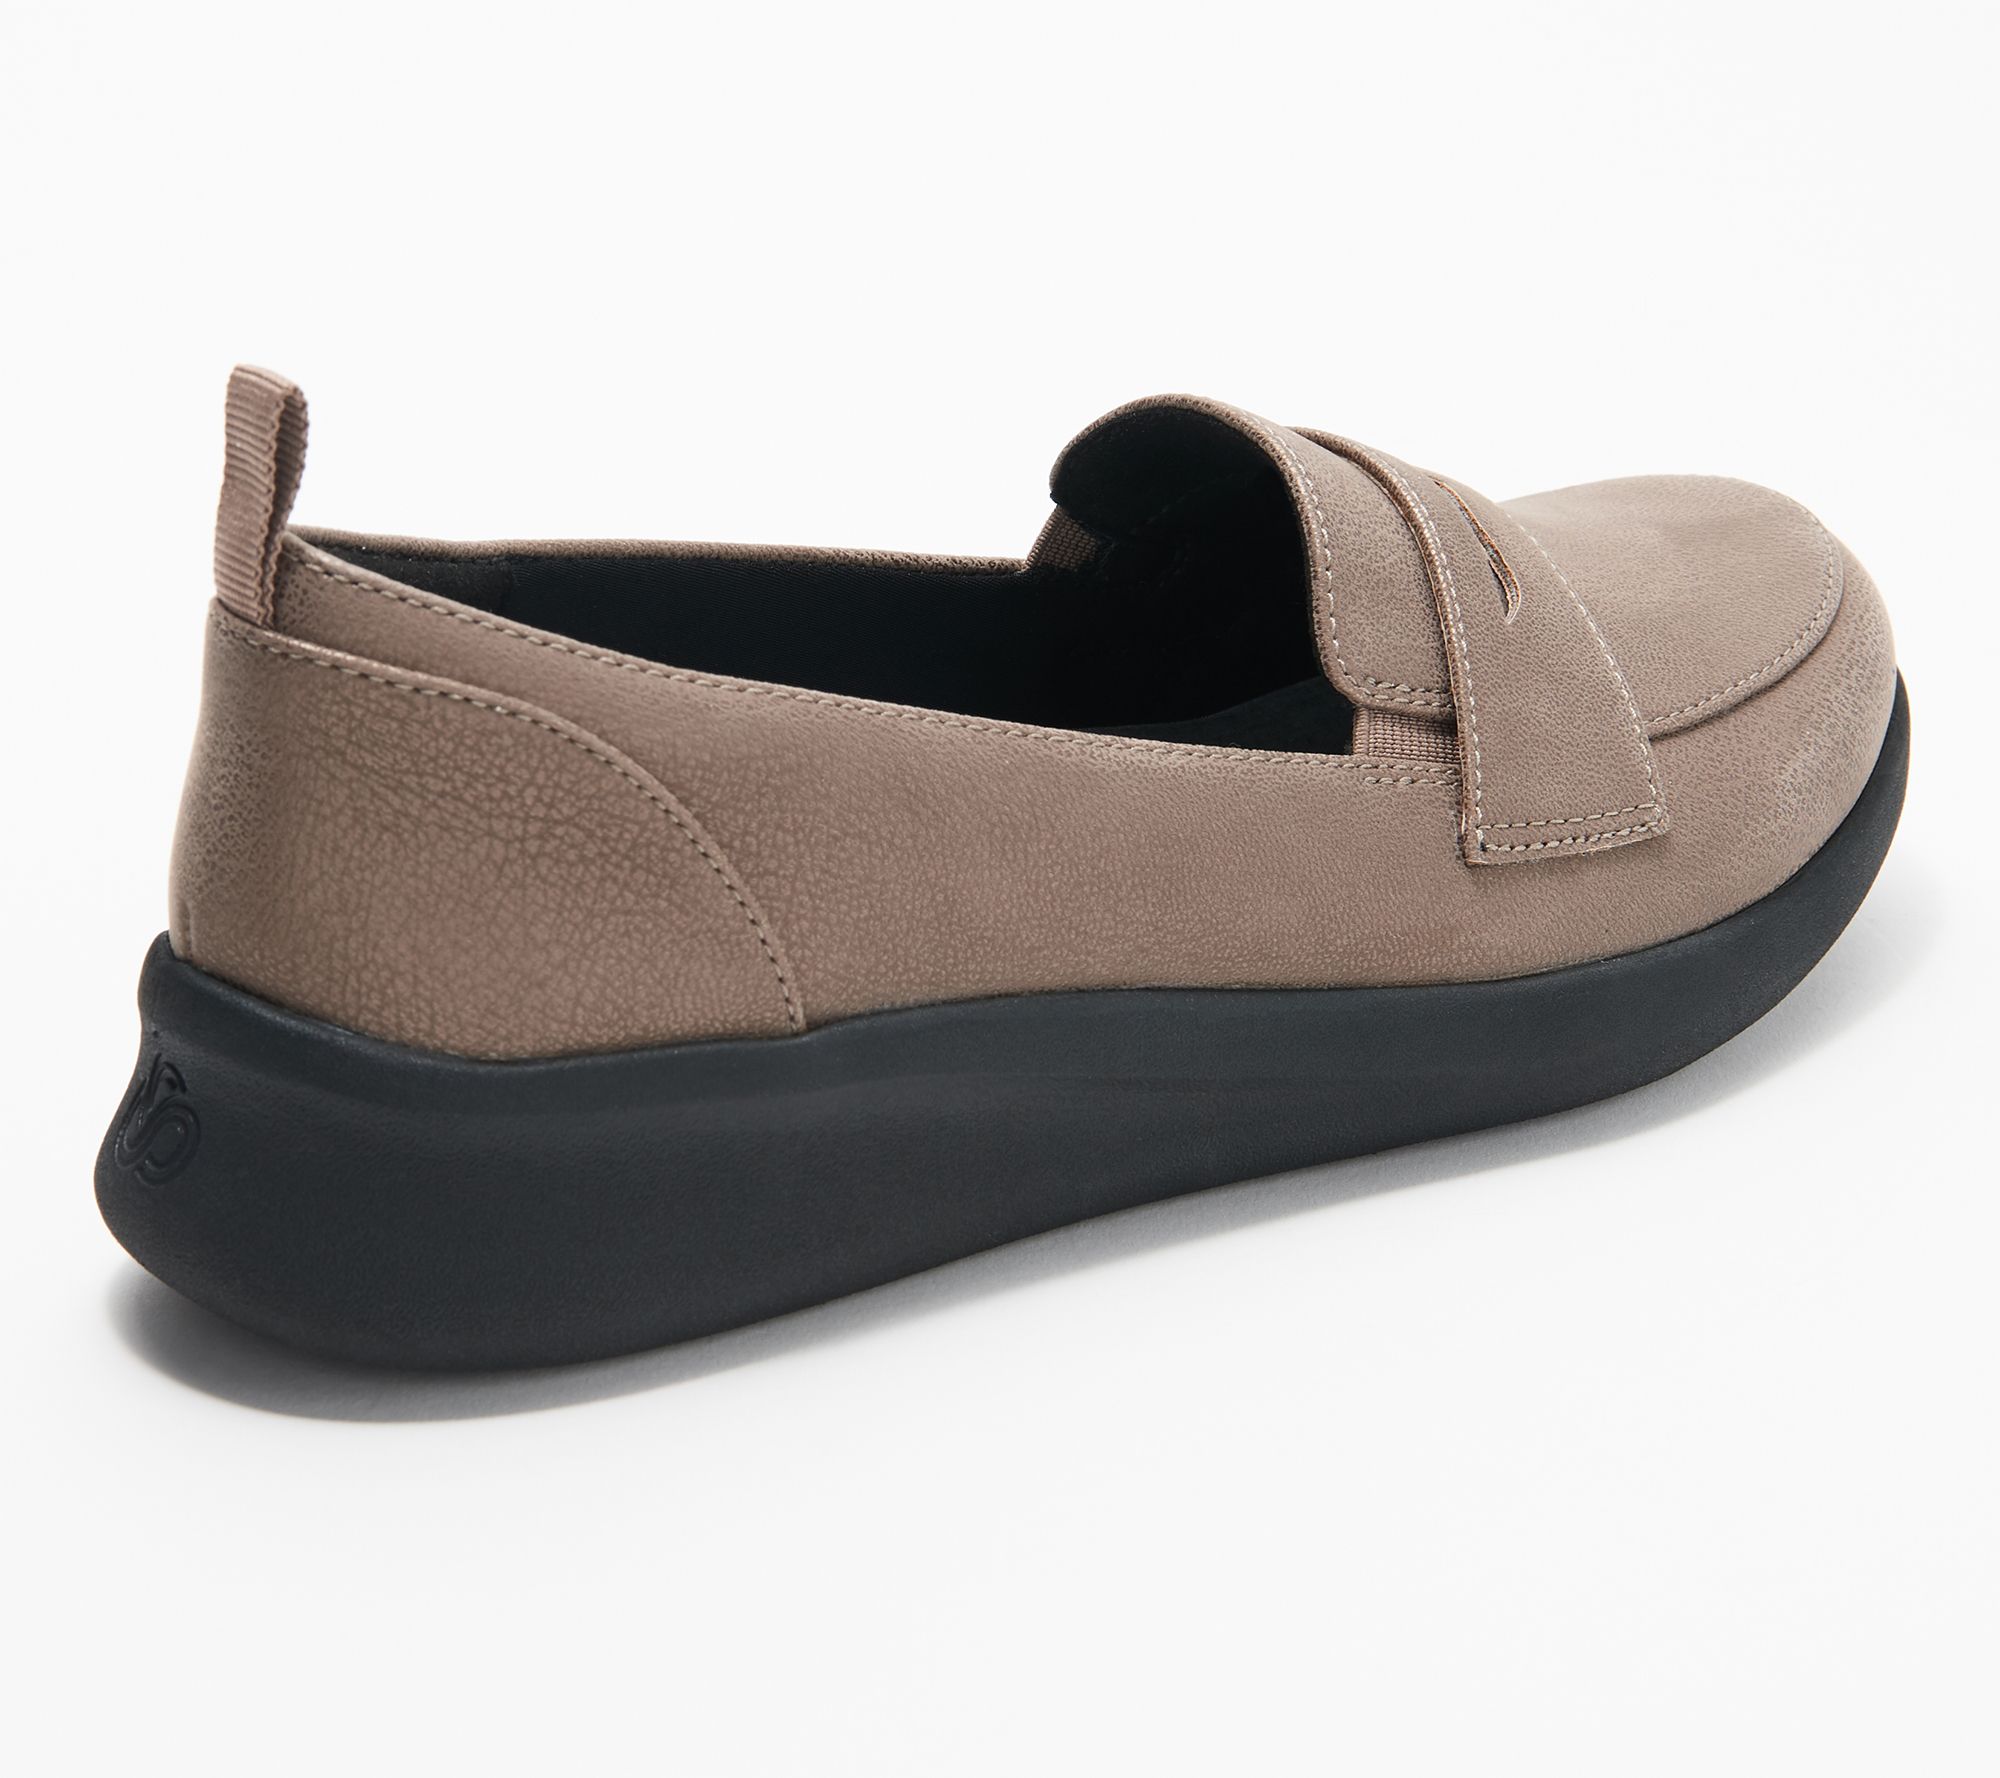 cloudsteppers loafers